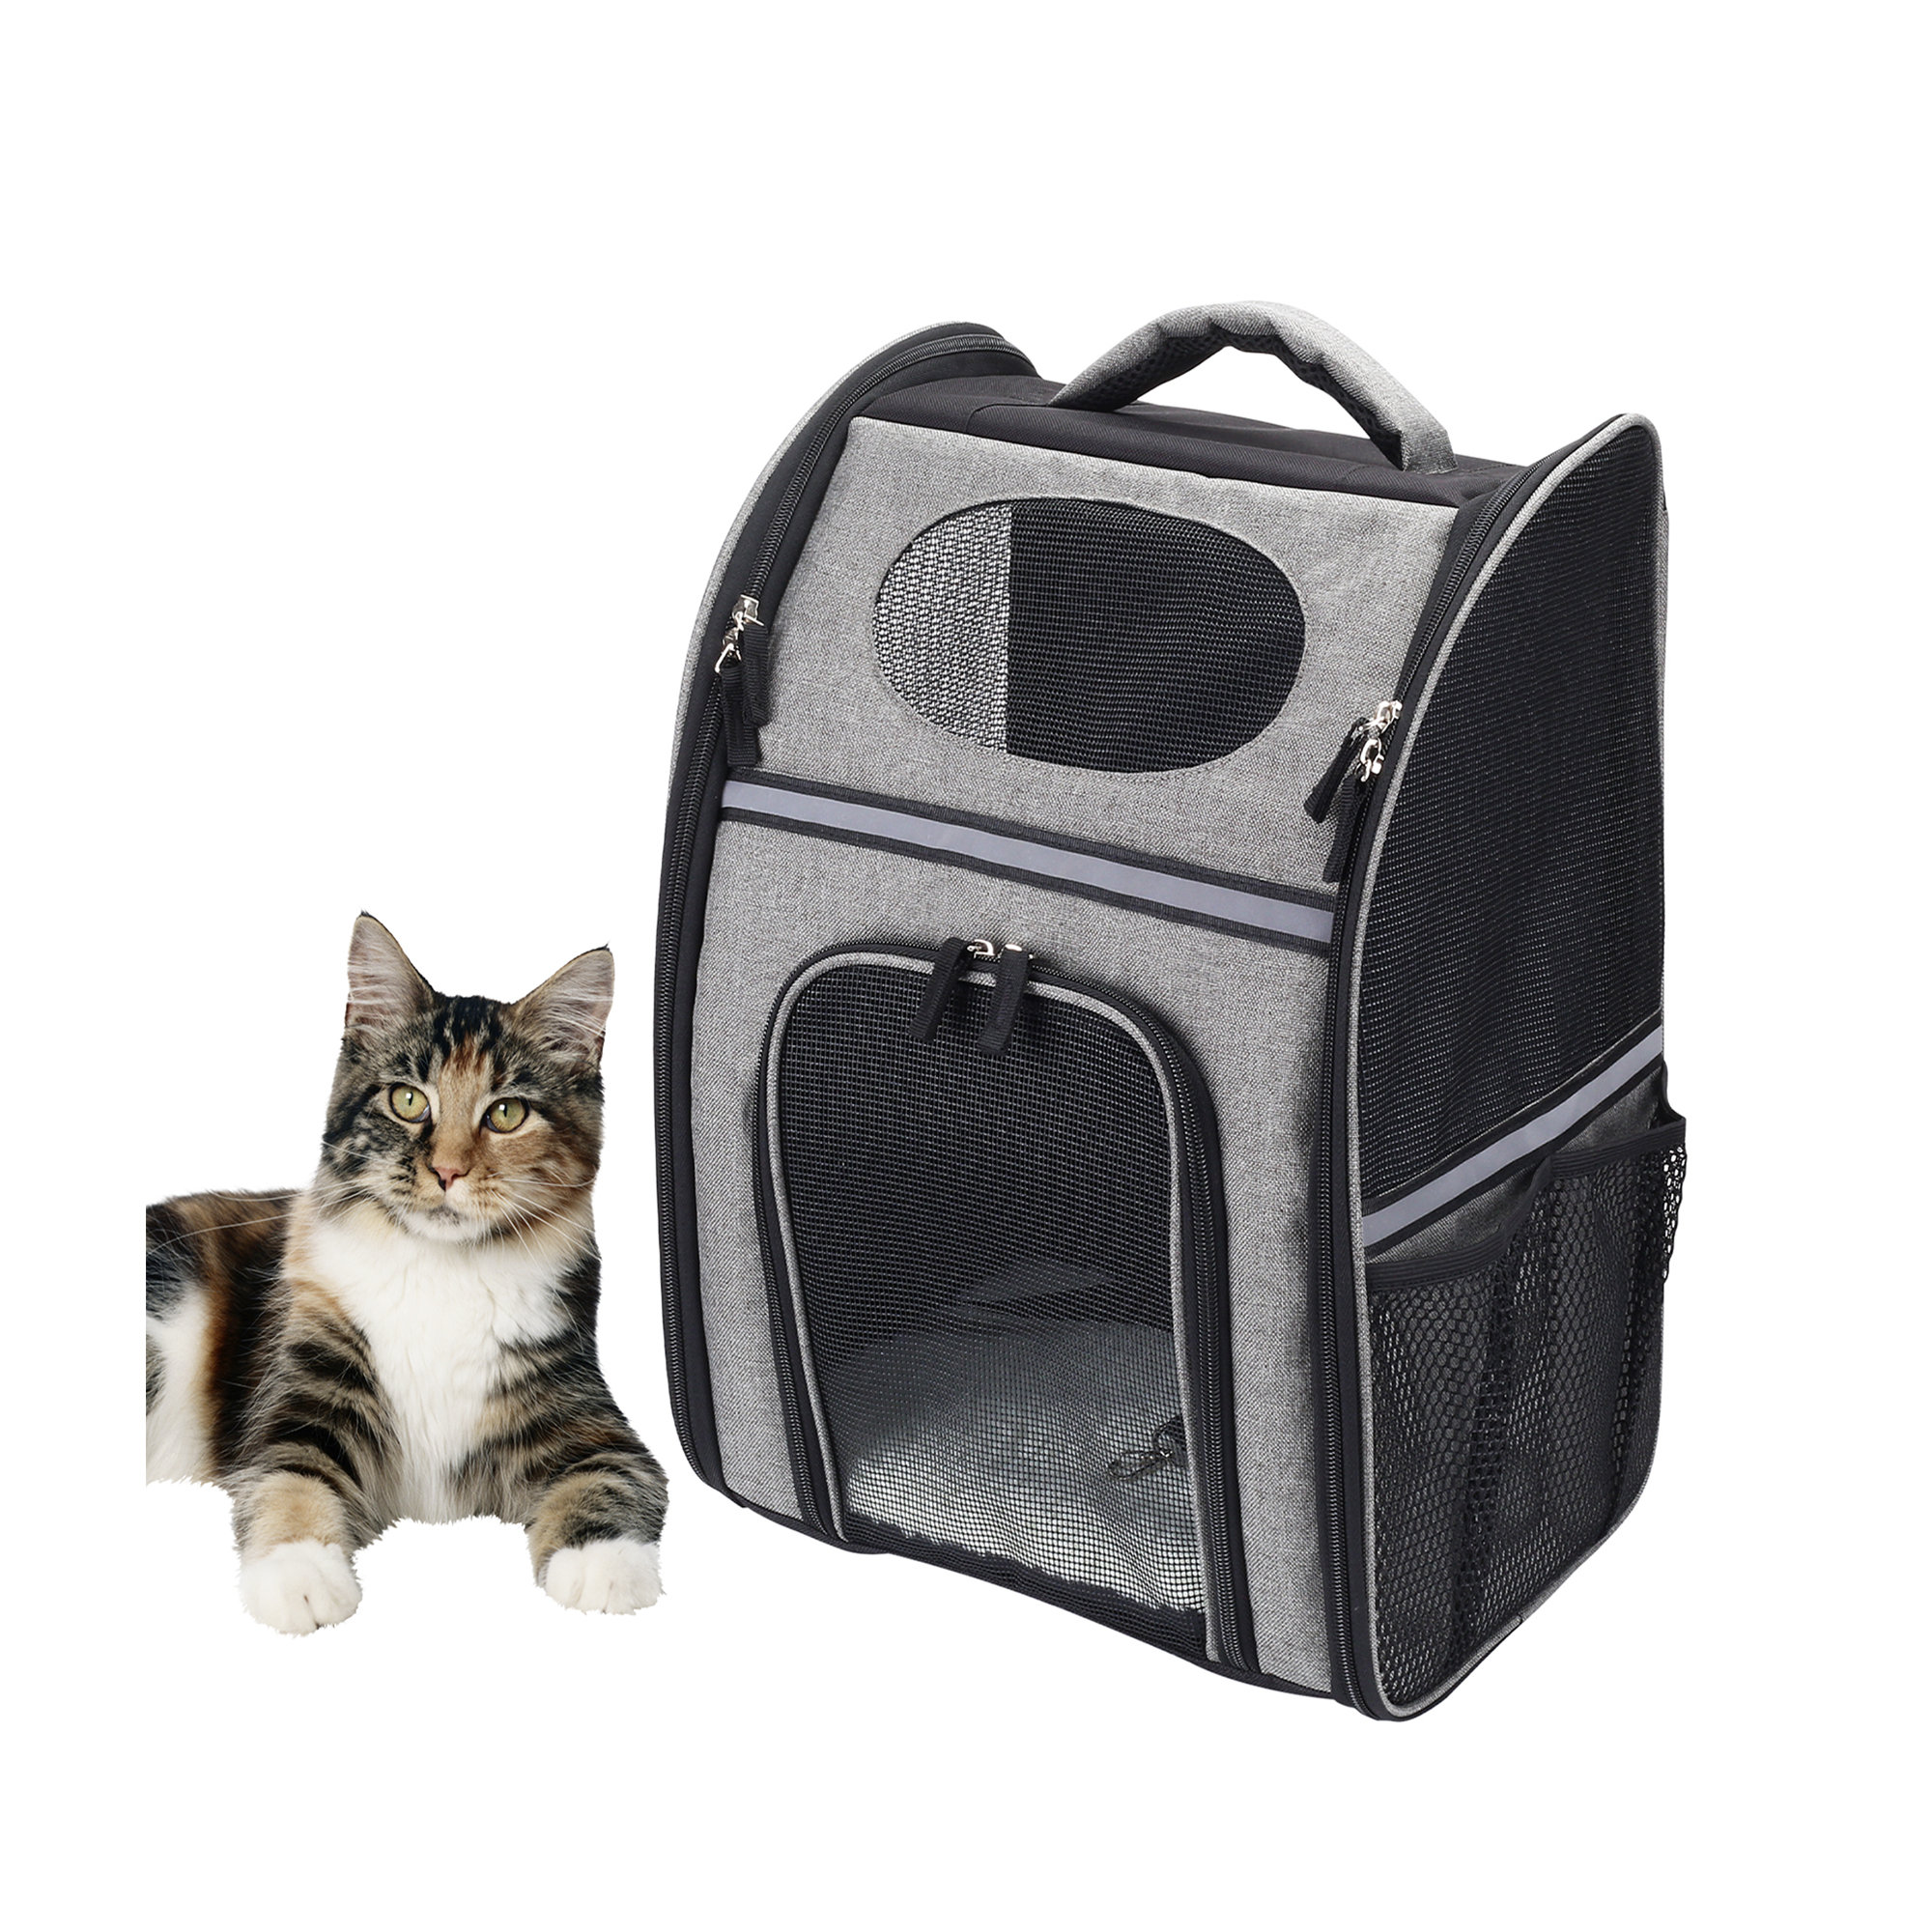 Adventure Cat Carrier Backpack with Window, Large Airline-Approved